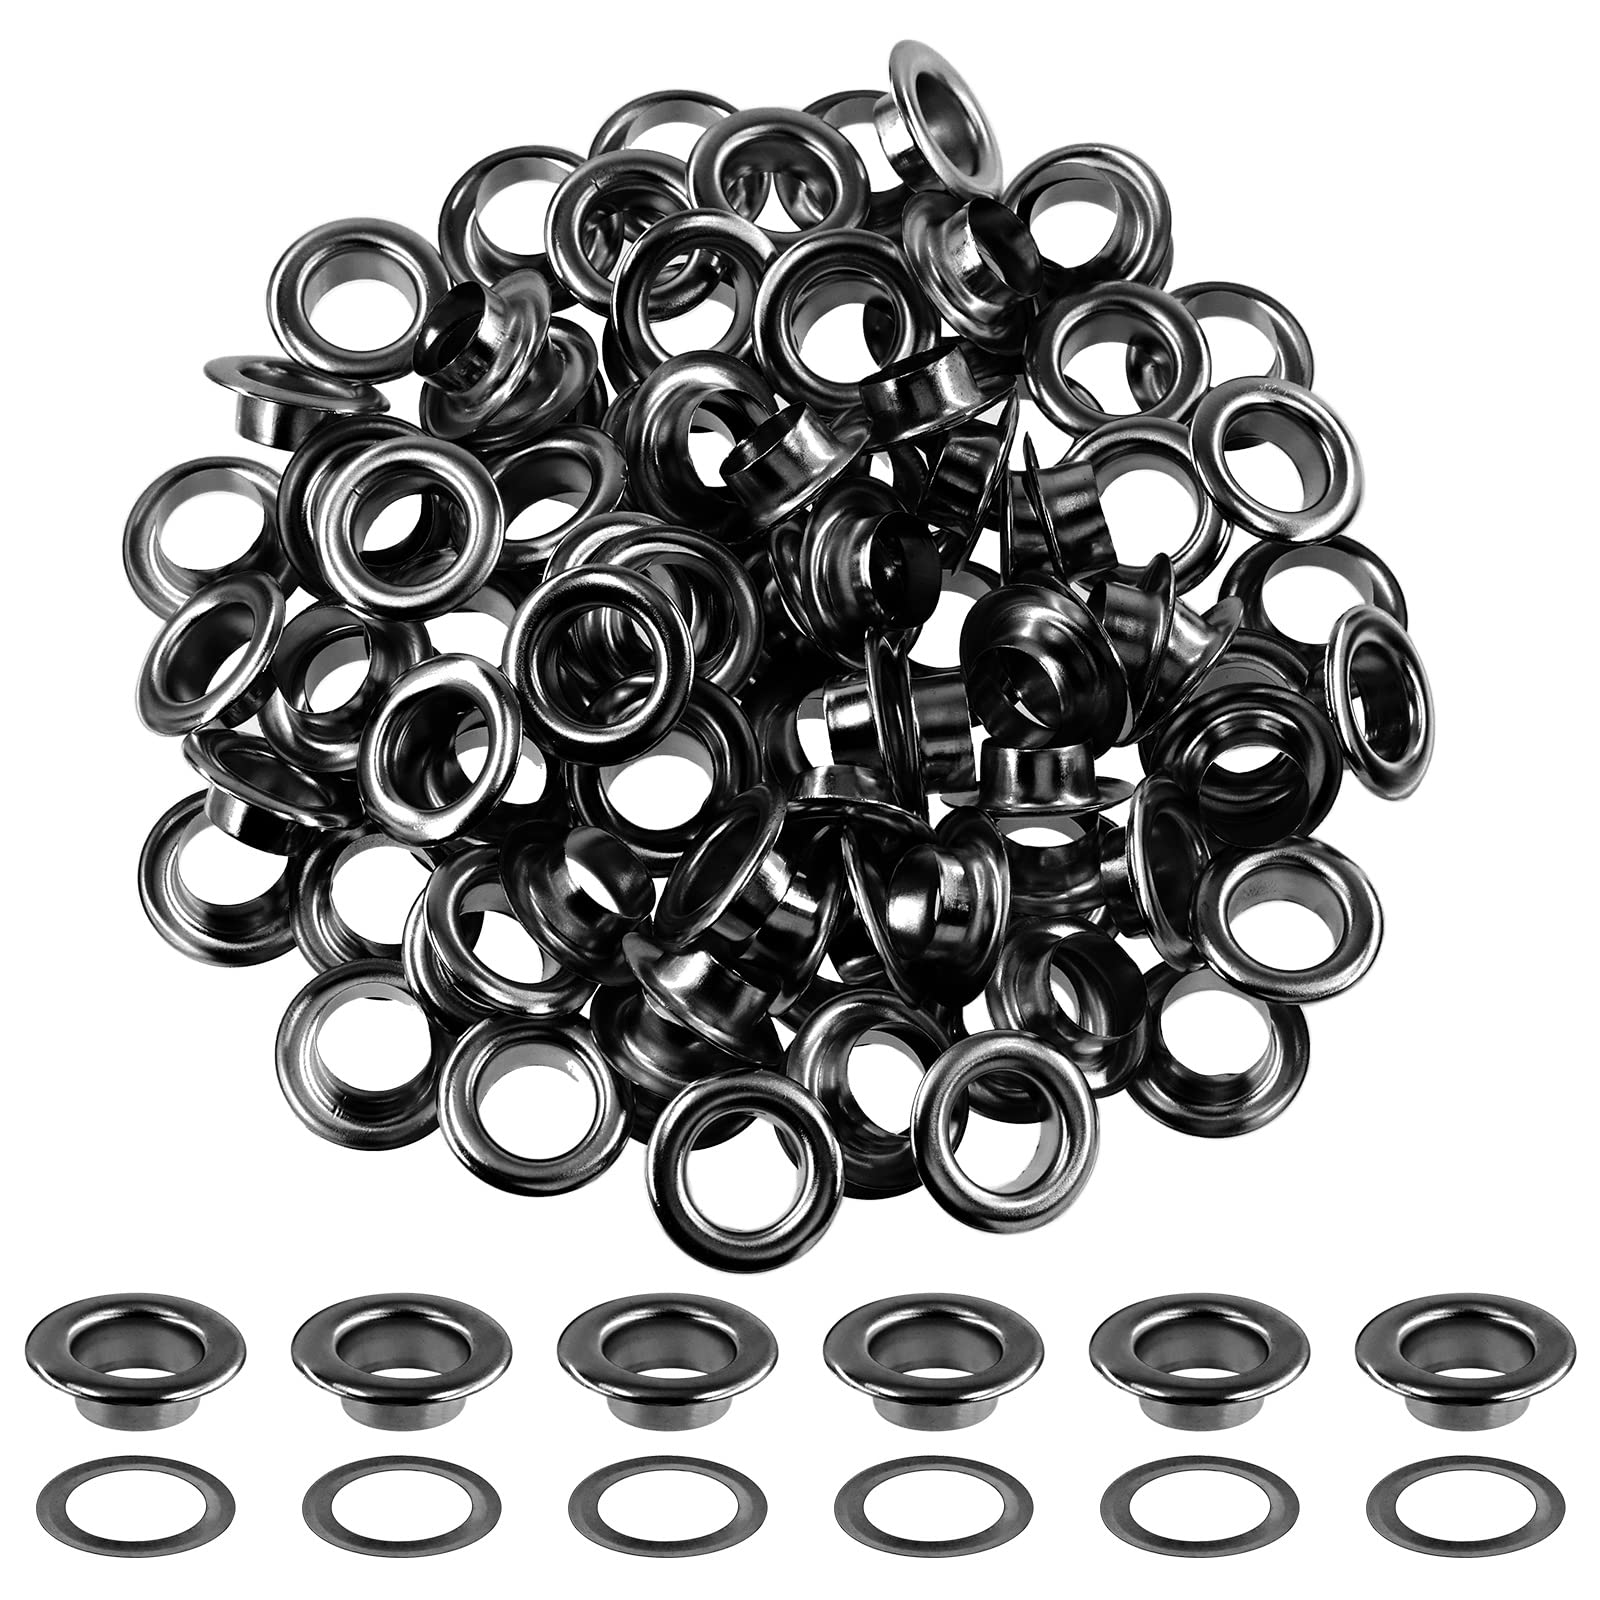 Hilitchi 200Pcs 1/2 Inch - 12mm Gun-Black Thicken Grommet Eyelets Metal  Eyelets with Washers Assortment Kit, Hole Self Backing Eyelet for Bead  Cores, Clothes, Leather, Canvas Gun-Black 1/2 Inch - 12mm